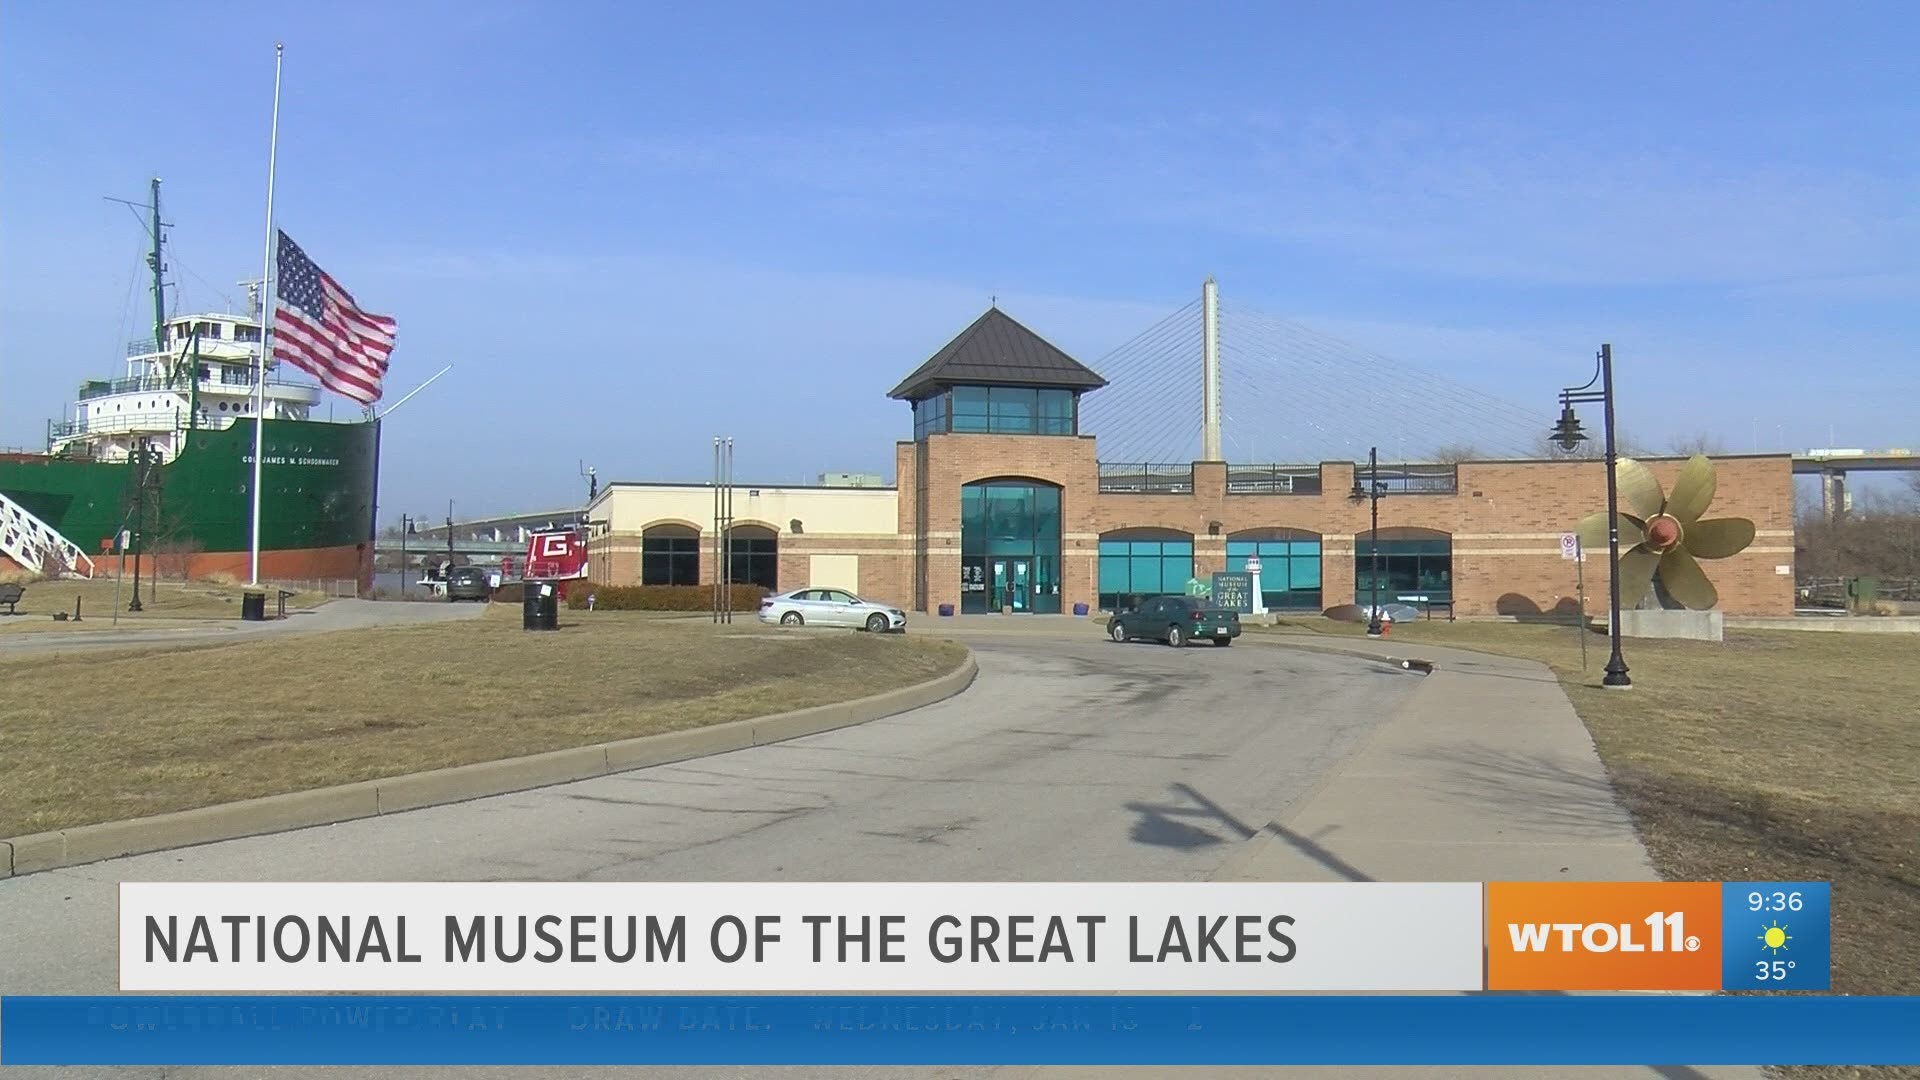 Visitors on Saturday, Sunday and Monday can explore Great Lakes history for free!